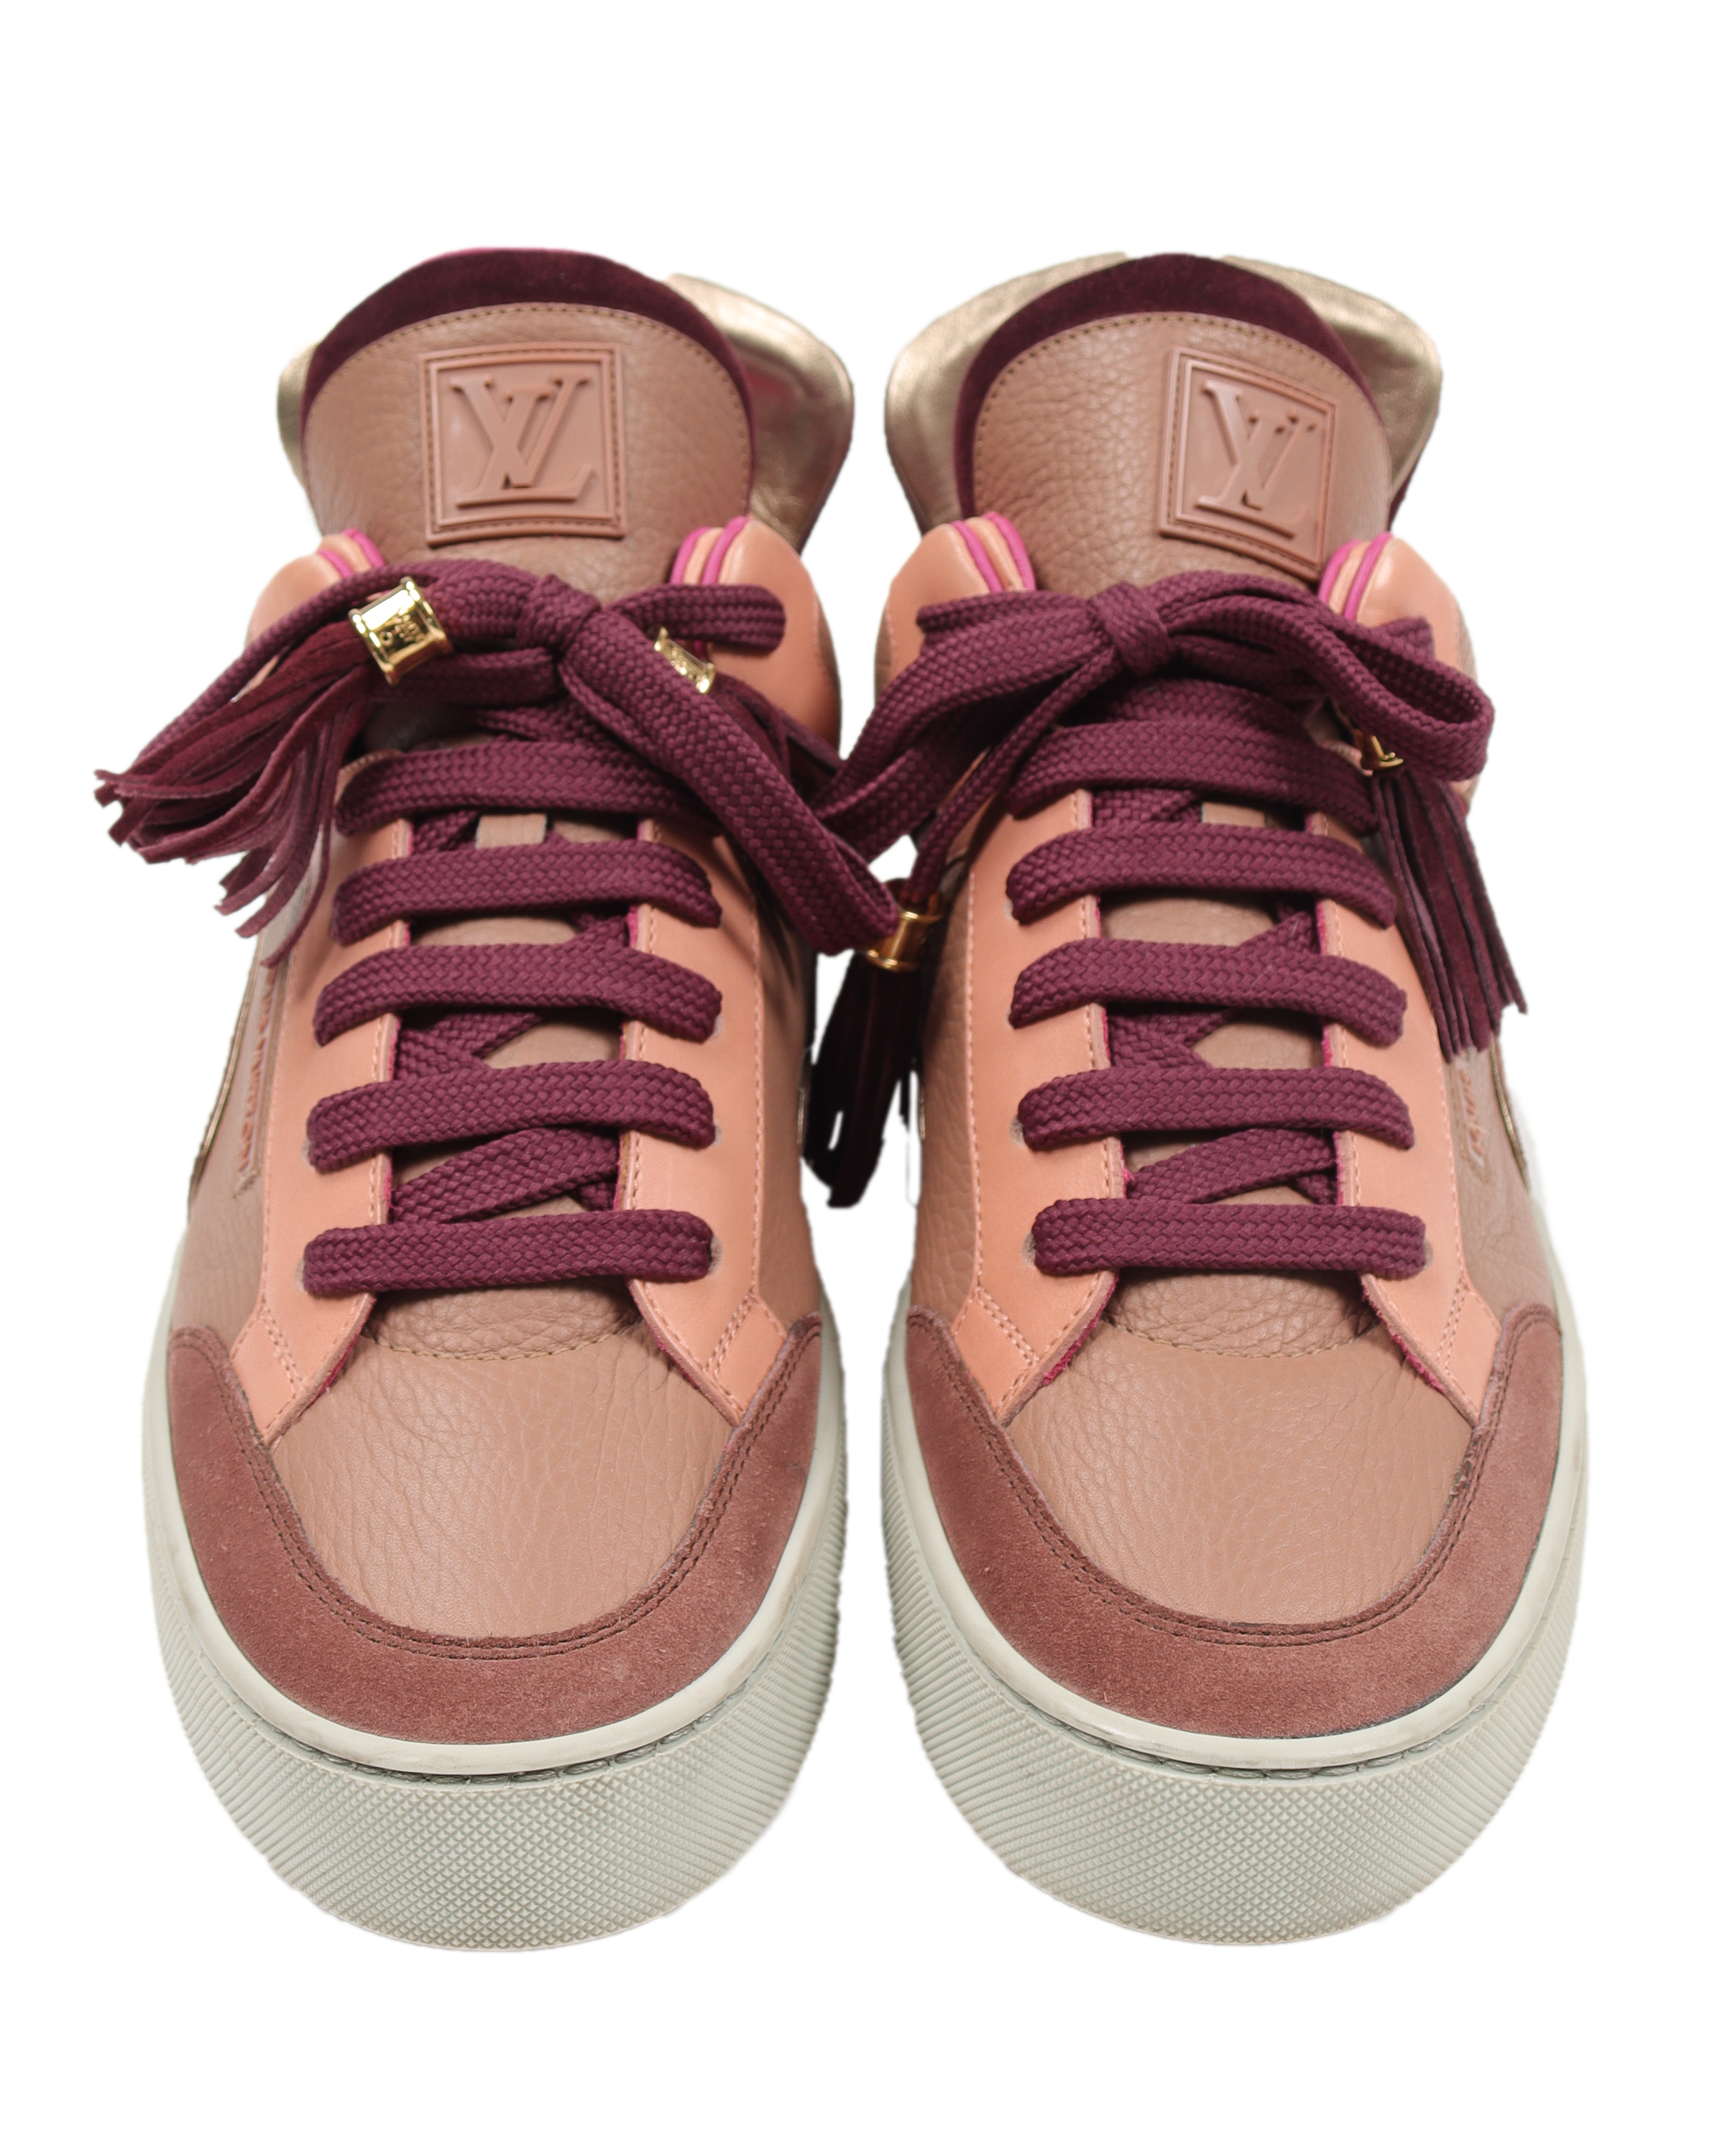 Kanye West x Louis Vuitton Don Yeezy Patchwork